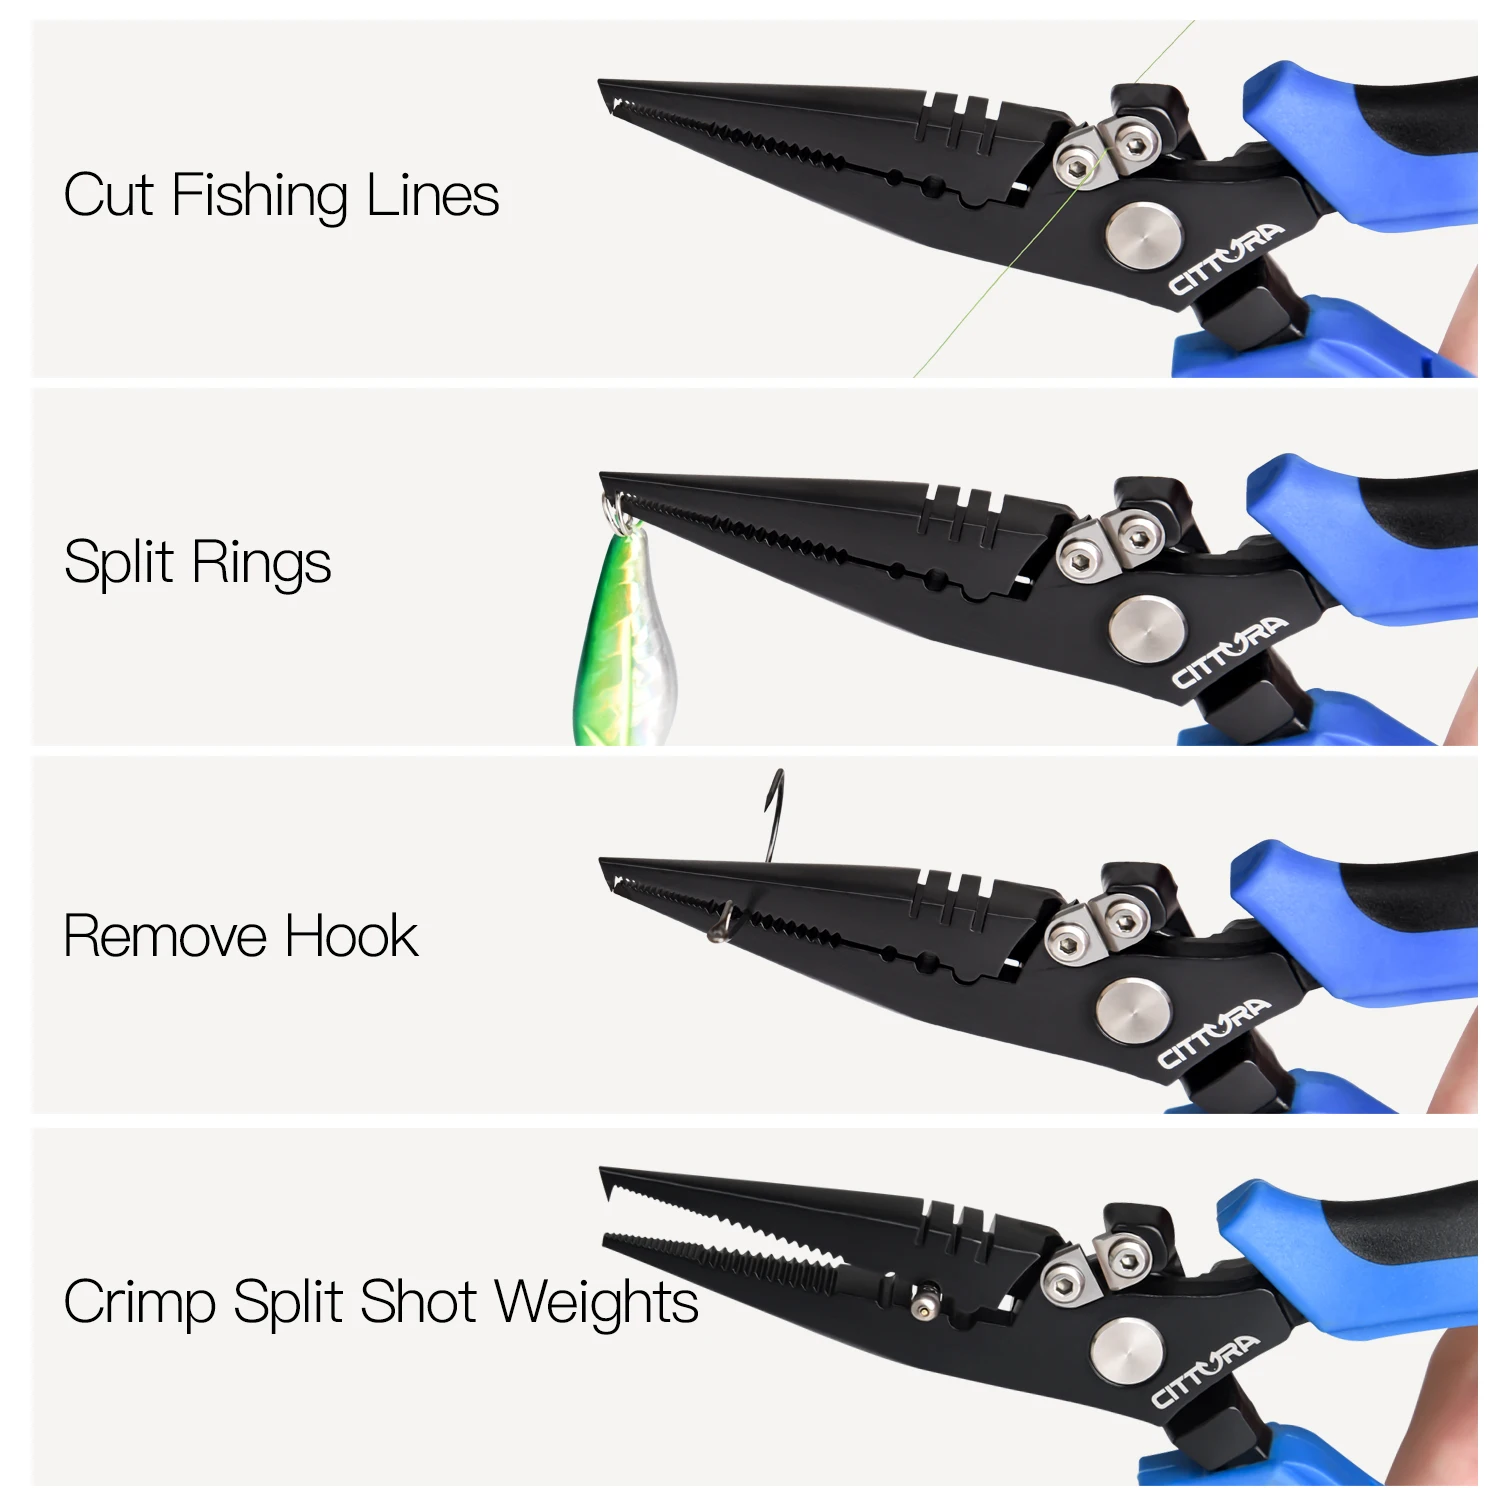 https://ae01.alicdn.com/kf/Sfc4b523c18e648bb883eddc1c2553b81G/CITTURA-Fishing-Pliers-7-inch-Fishing-Tools-Holder-with-Corrosion-Resistant-Coating-Fishing-Pliers-Hook-Remover.jpg